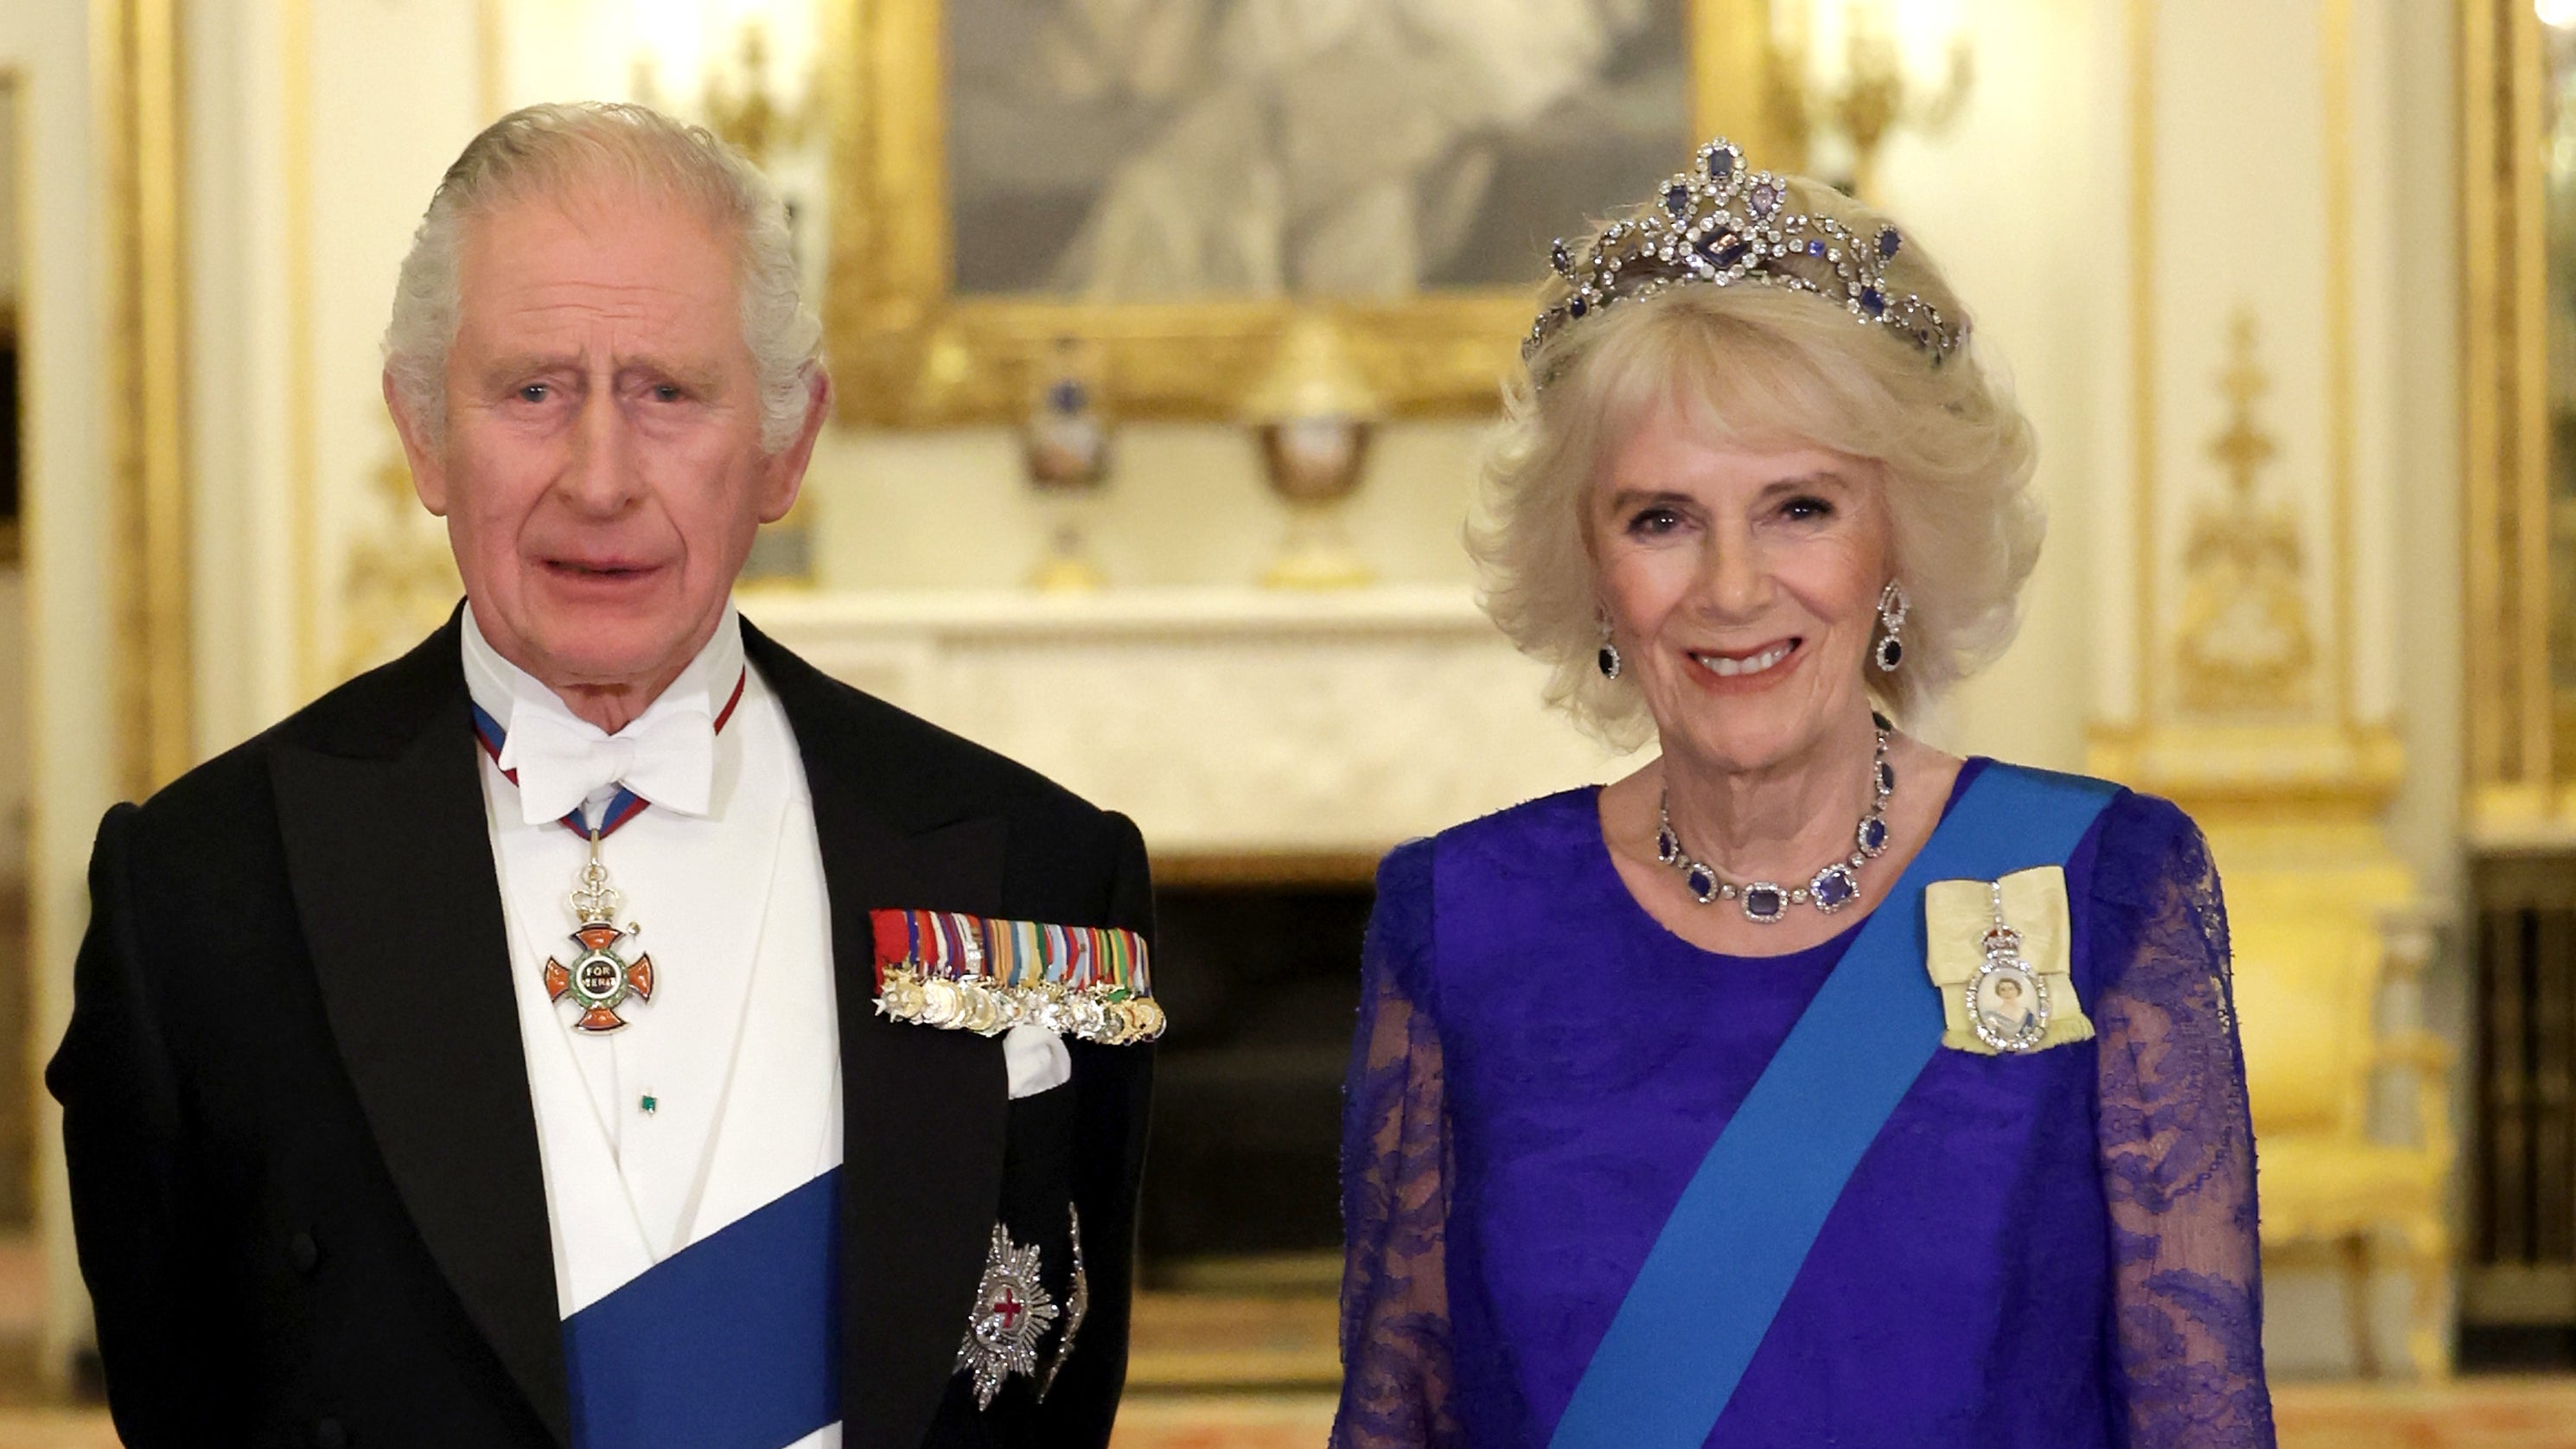 The affair between Charles and Camilla has become a love story of reconciliation